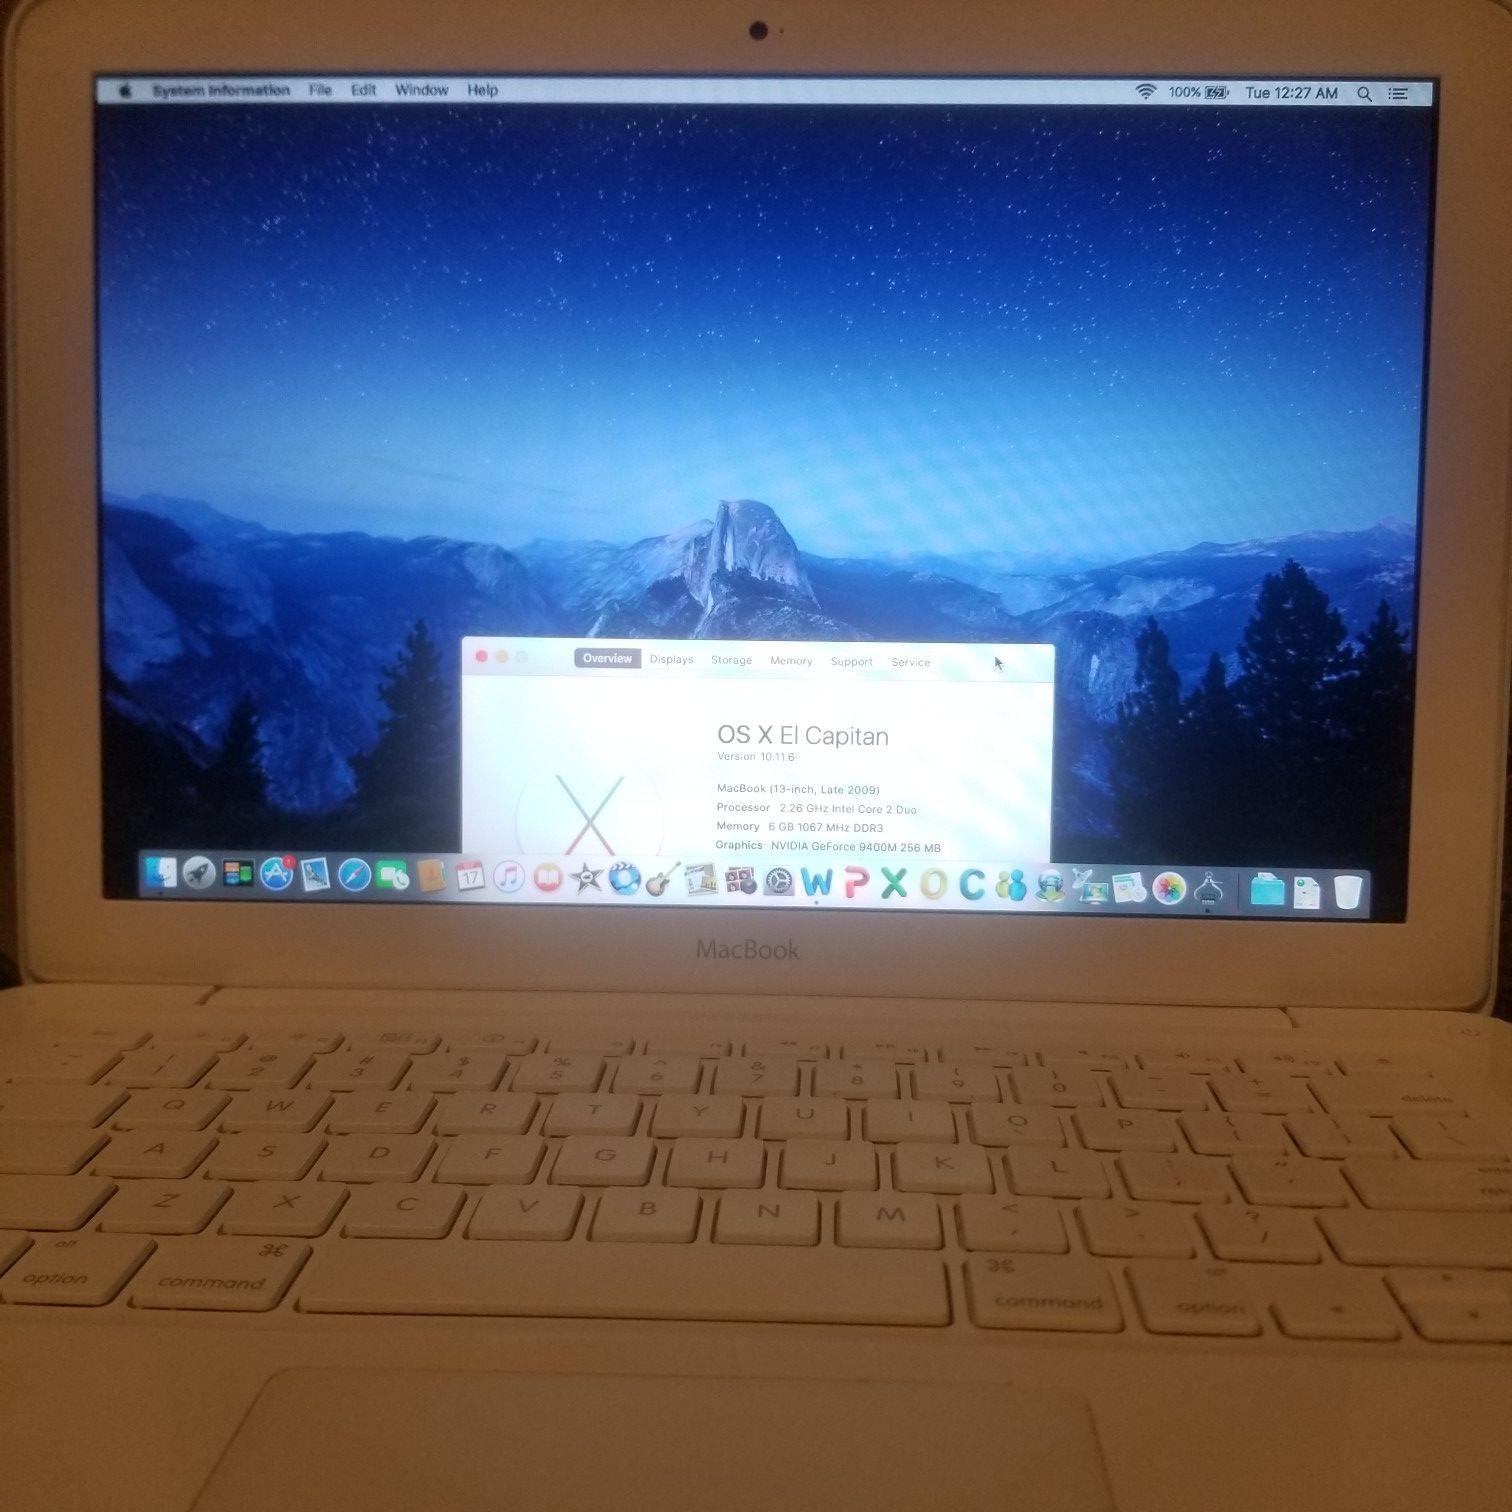 Macbook upgraded to 6GB RAM Memory 250gb 2.26GHZ intel core 2 duo Wireless Bluetooth built in mic Webcam periscope disc drive Airdrop music & charger